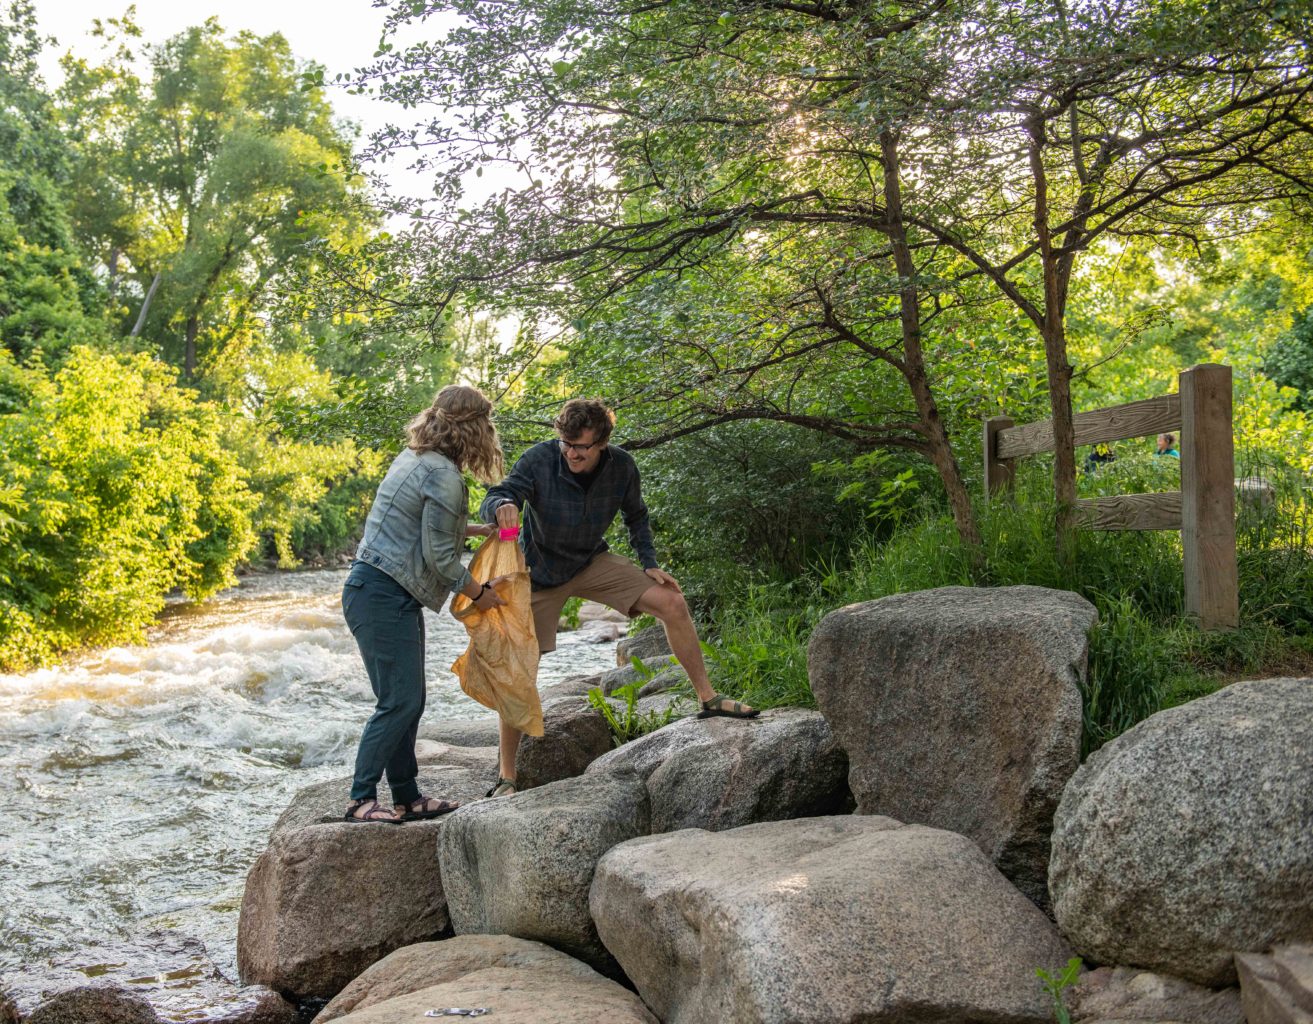 A woman holds open a trash bag as a man places a piece of trash into it. They are cleaning up trash on boulders along a creek.